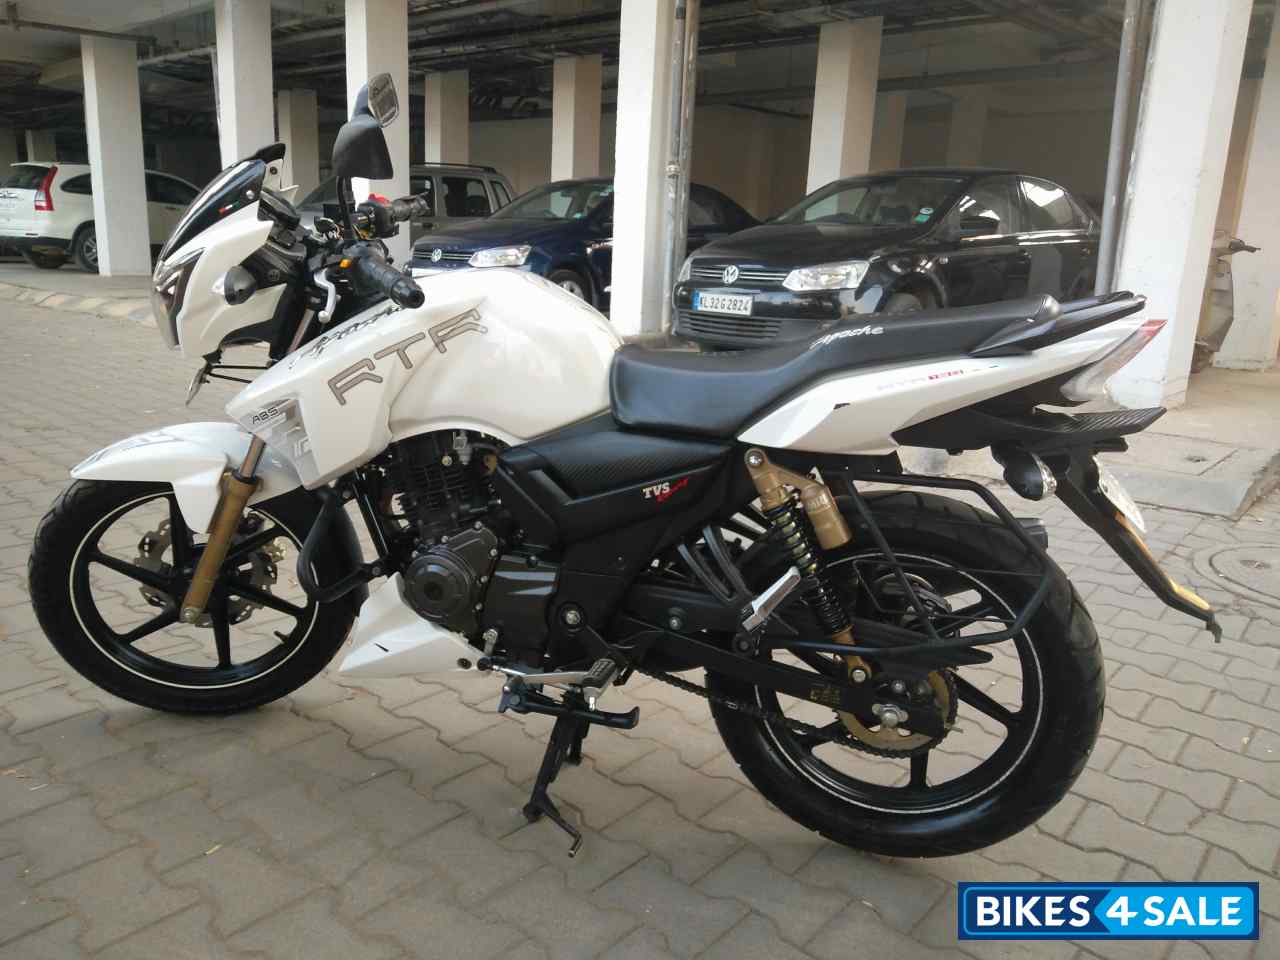 Used 2015 Model Tvs Apache Rtr 180 Abs For Sale In Bangalore Id 214013 Black And White Colour Bikes4sale